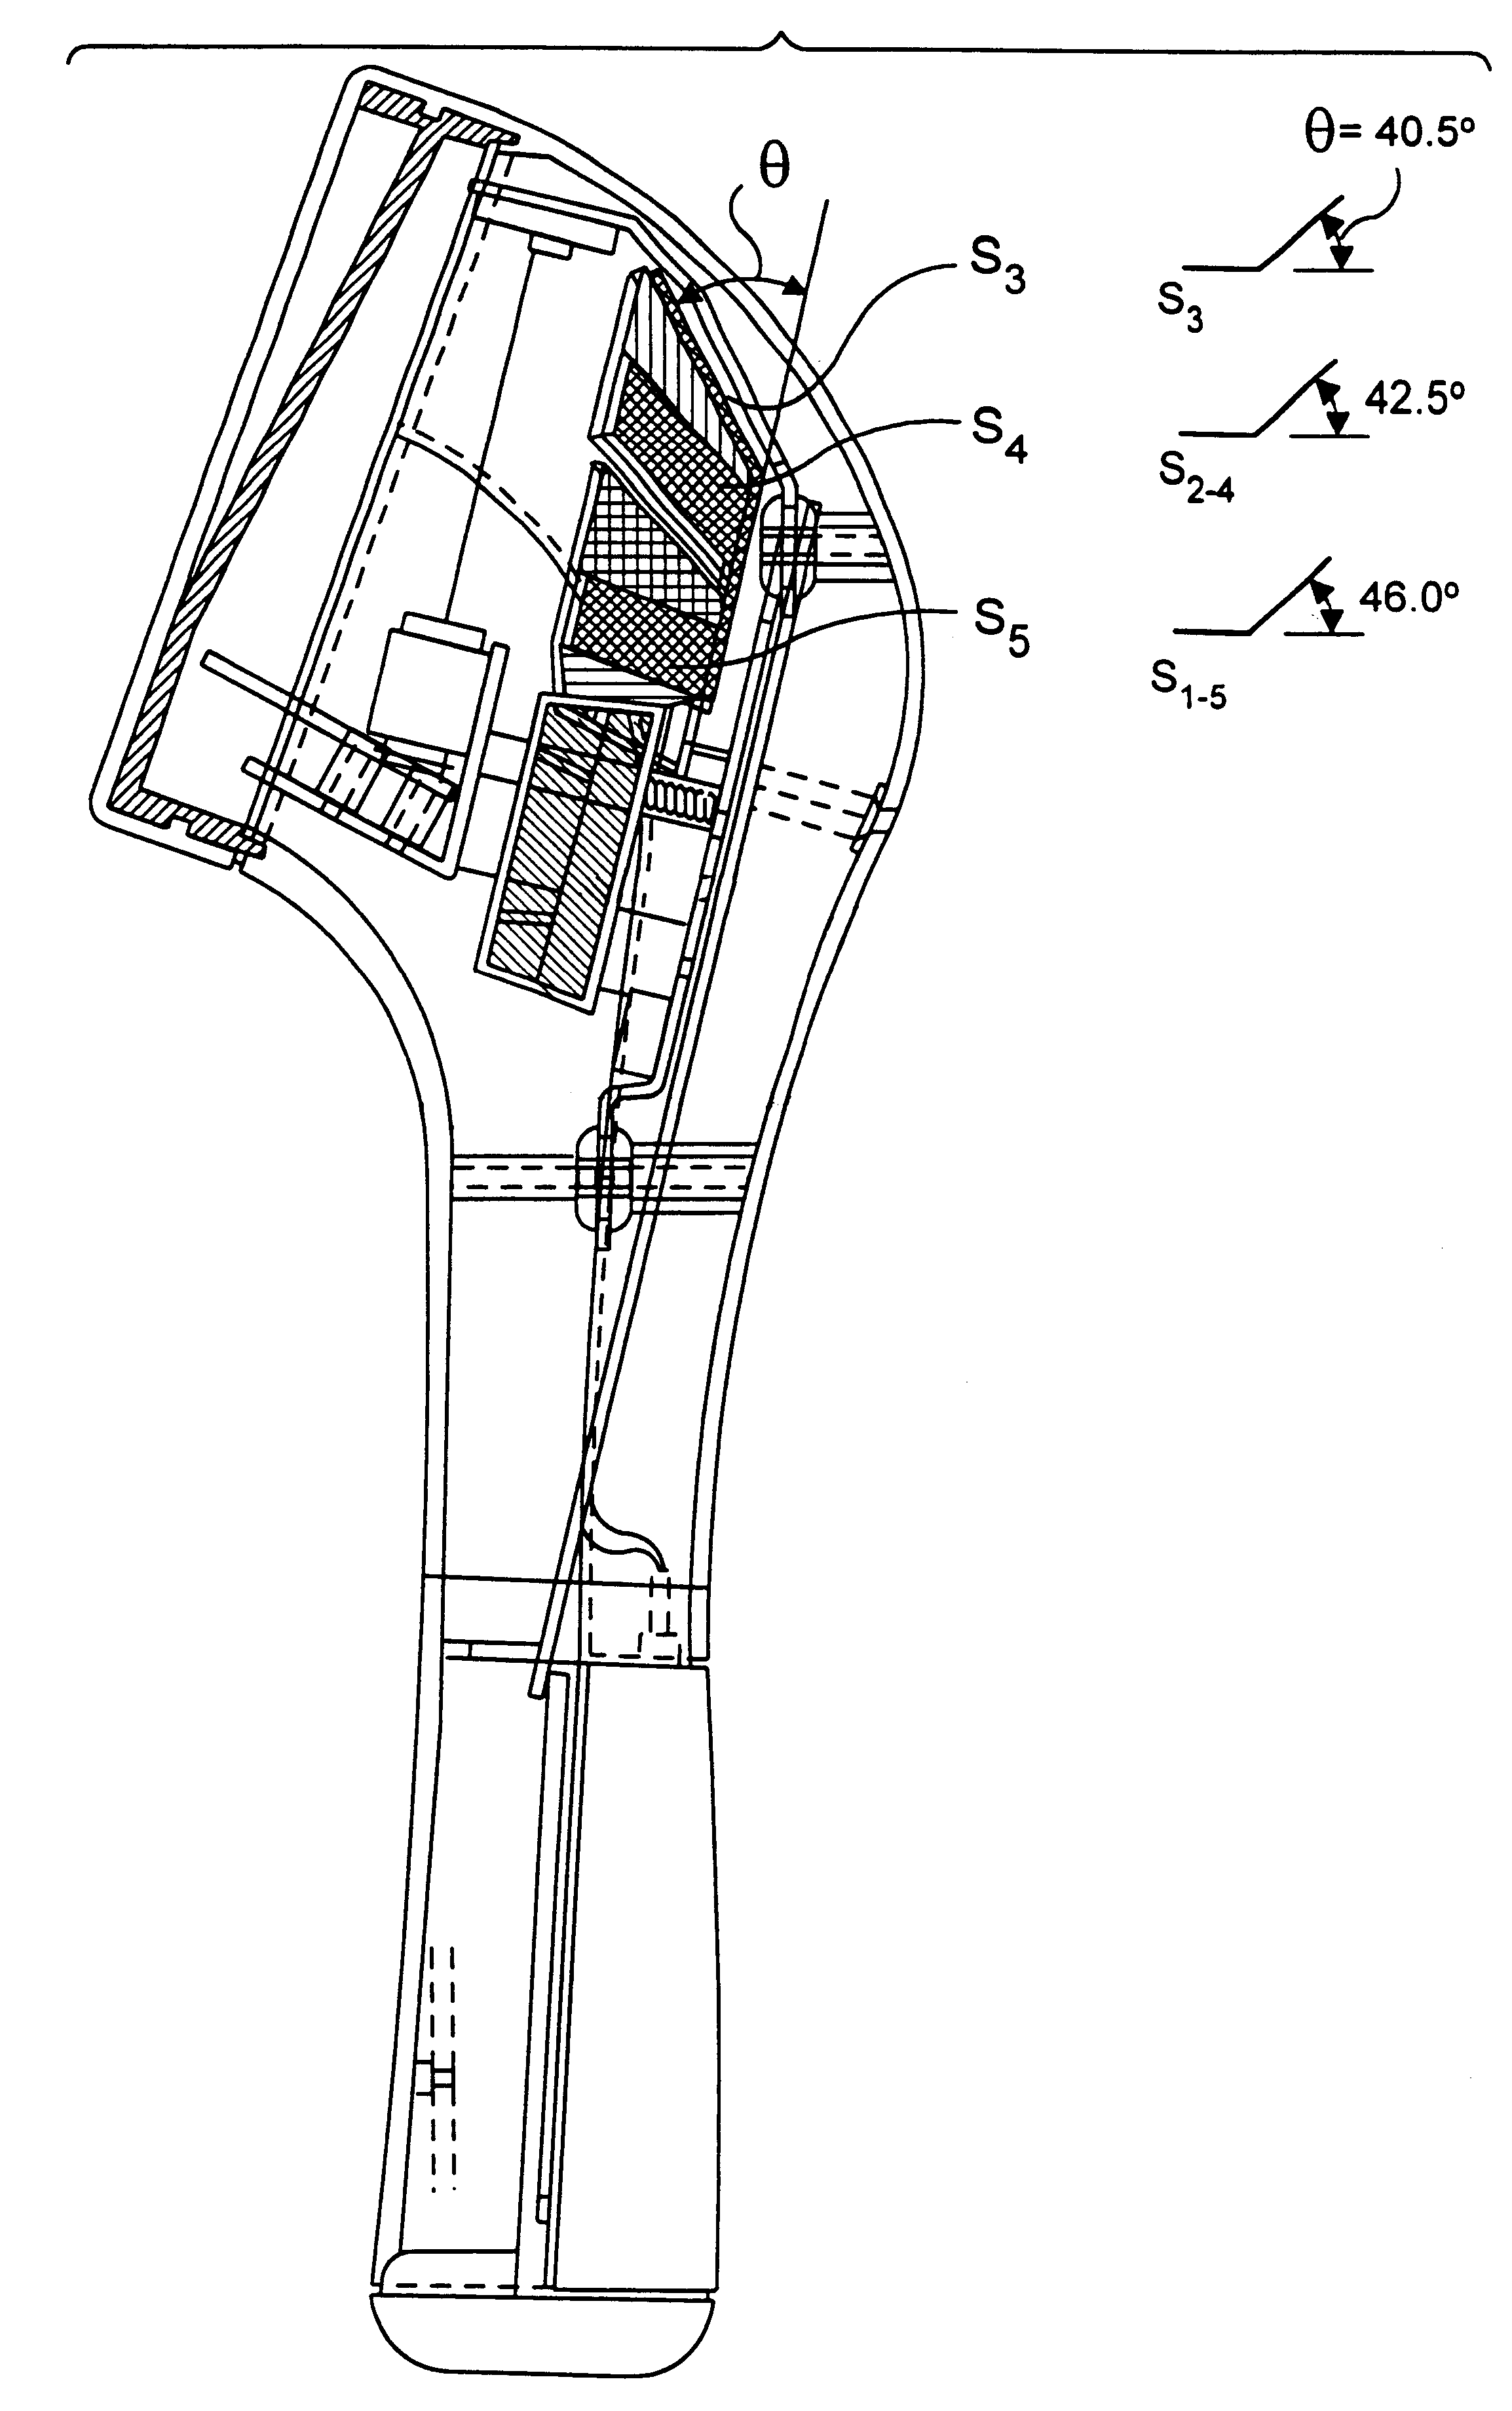 Bar code scanner with intuitive head aiming and collimated scan volume